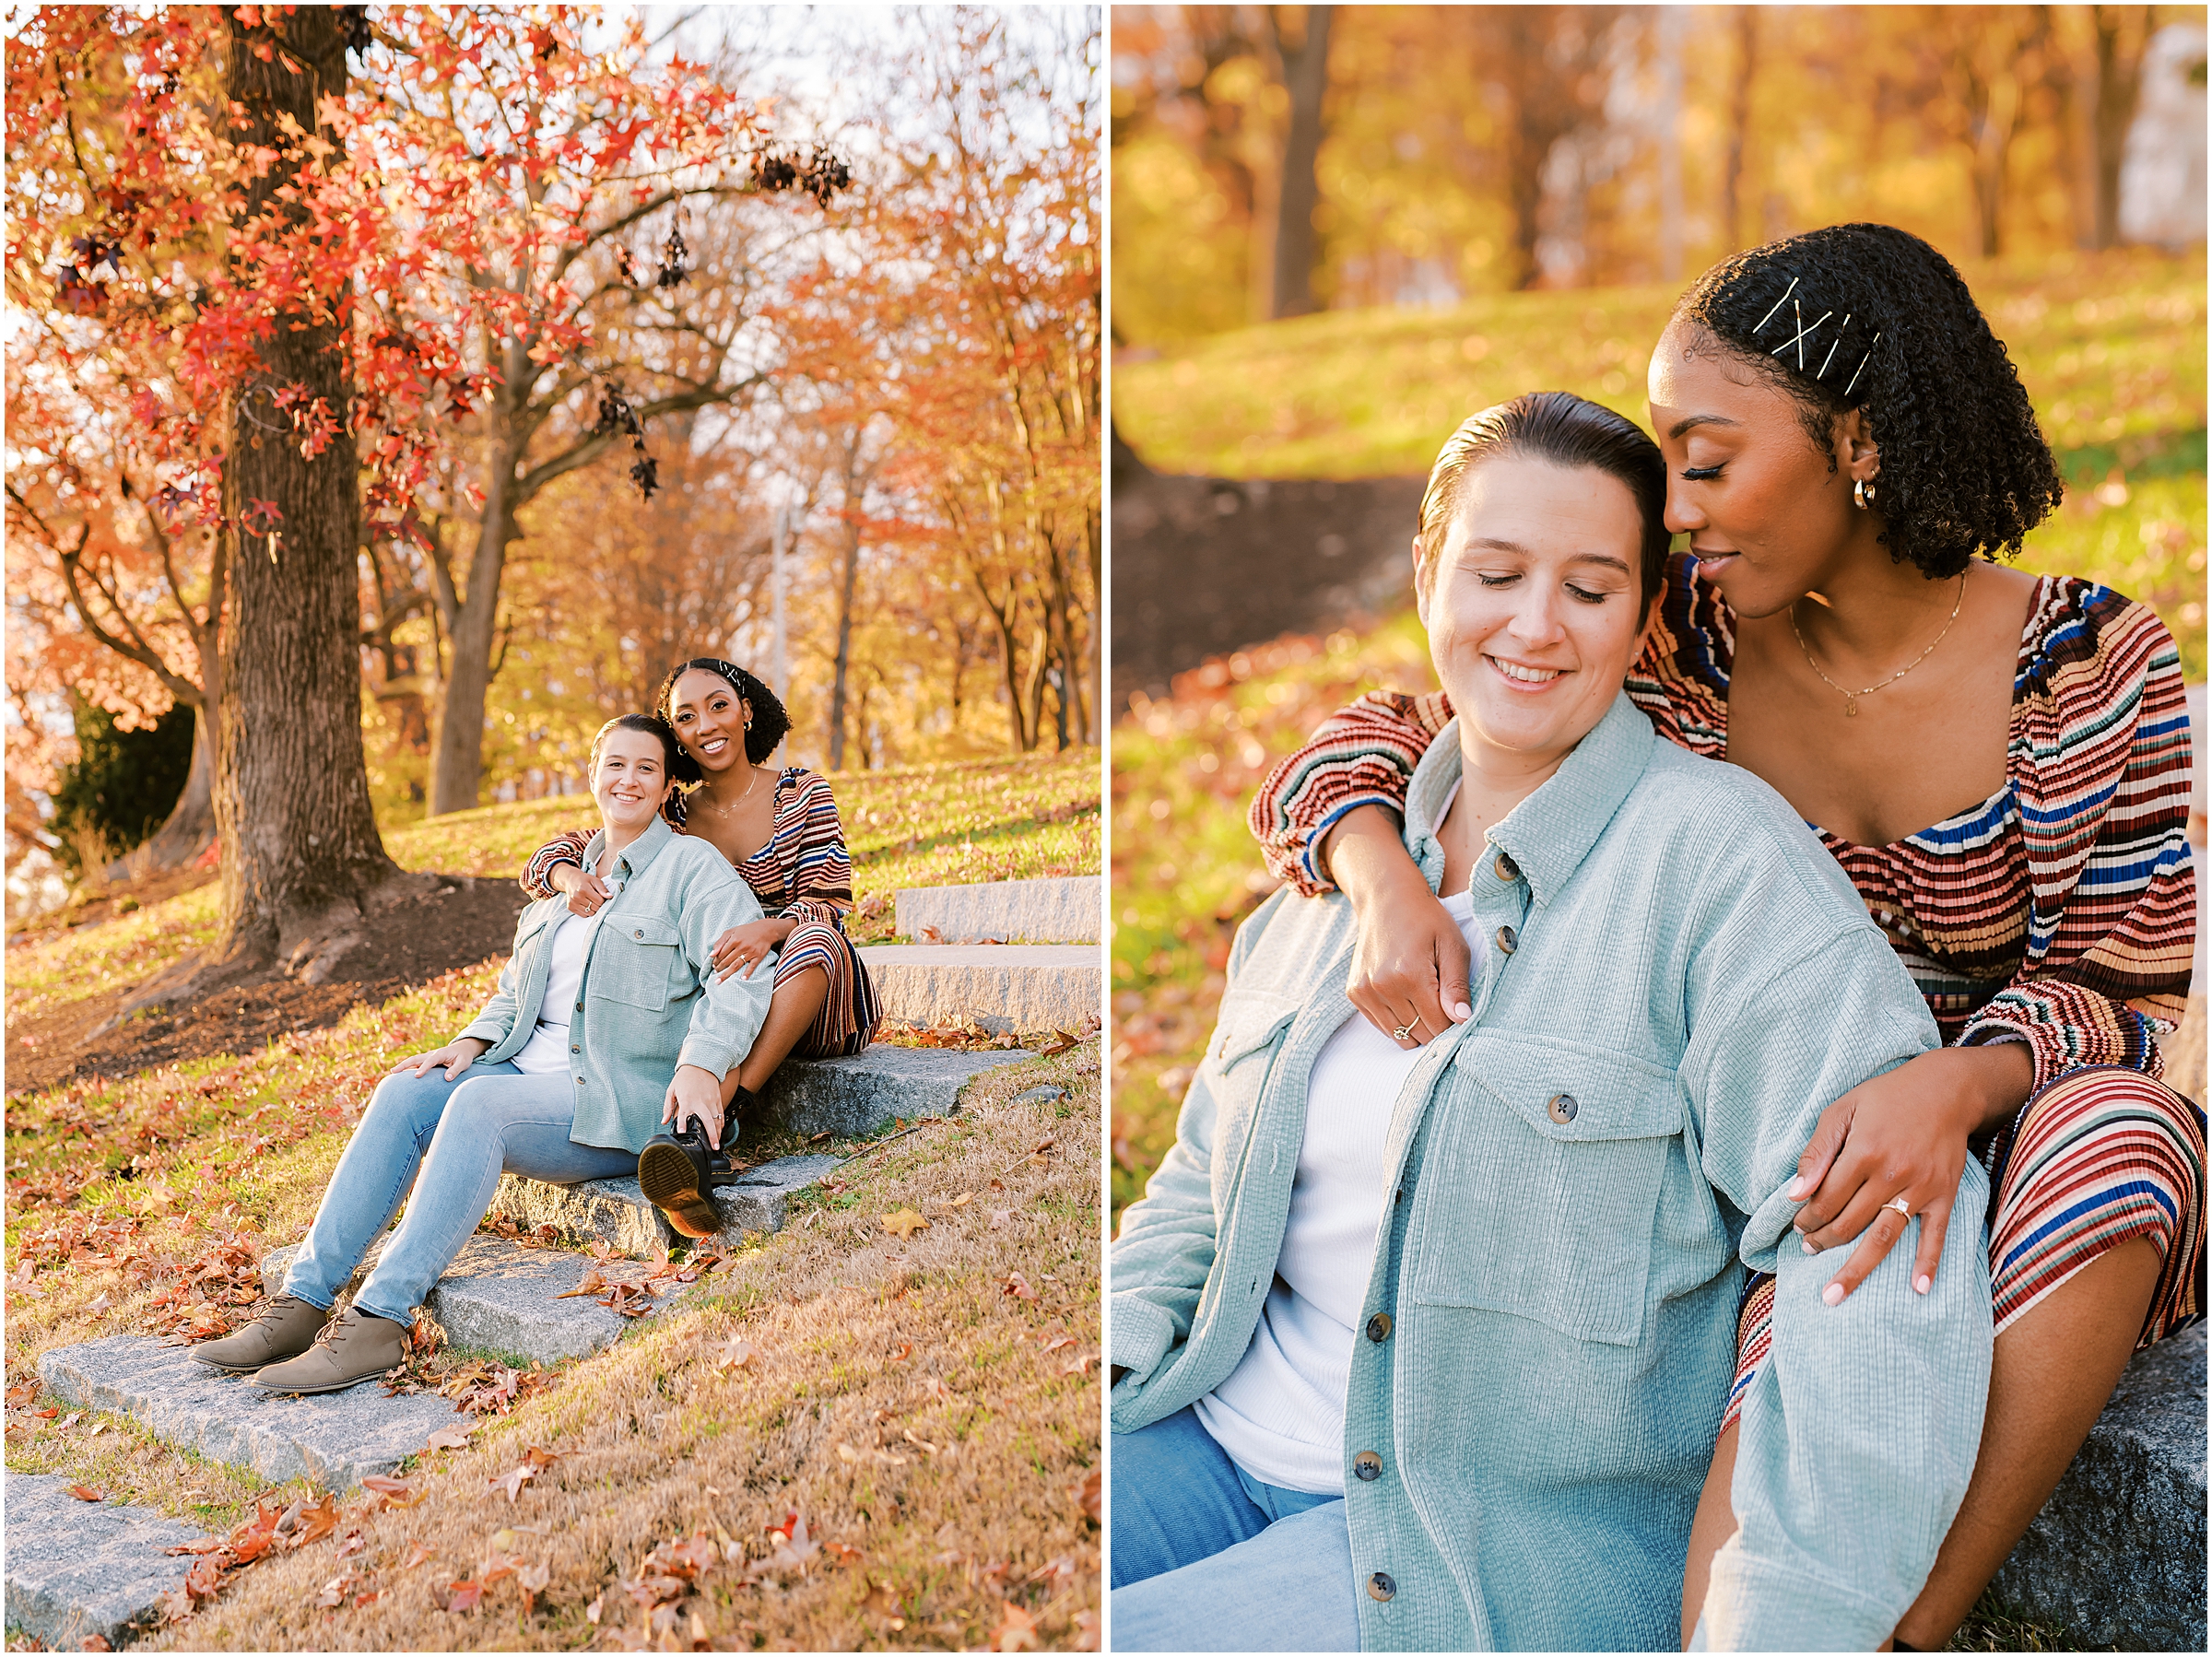 Couple embracing on stairs against fall foliage